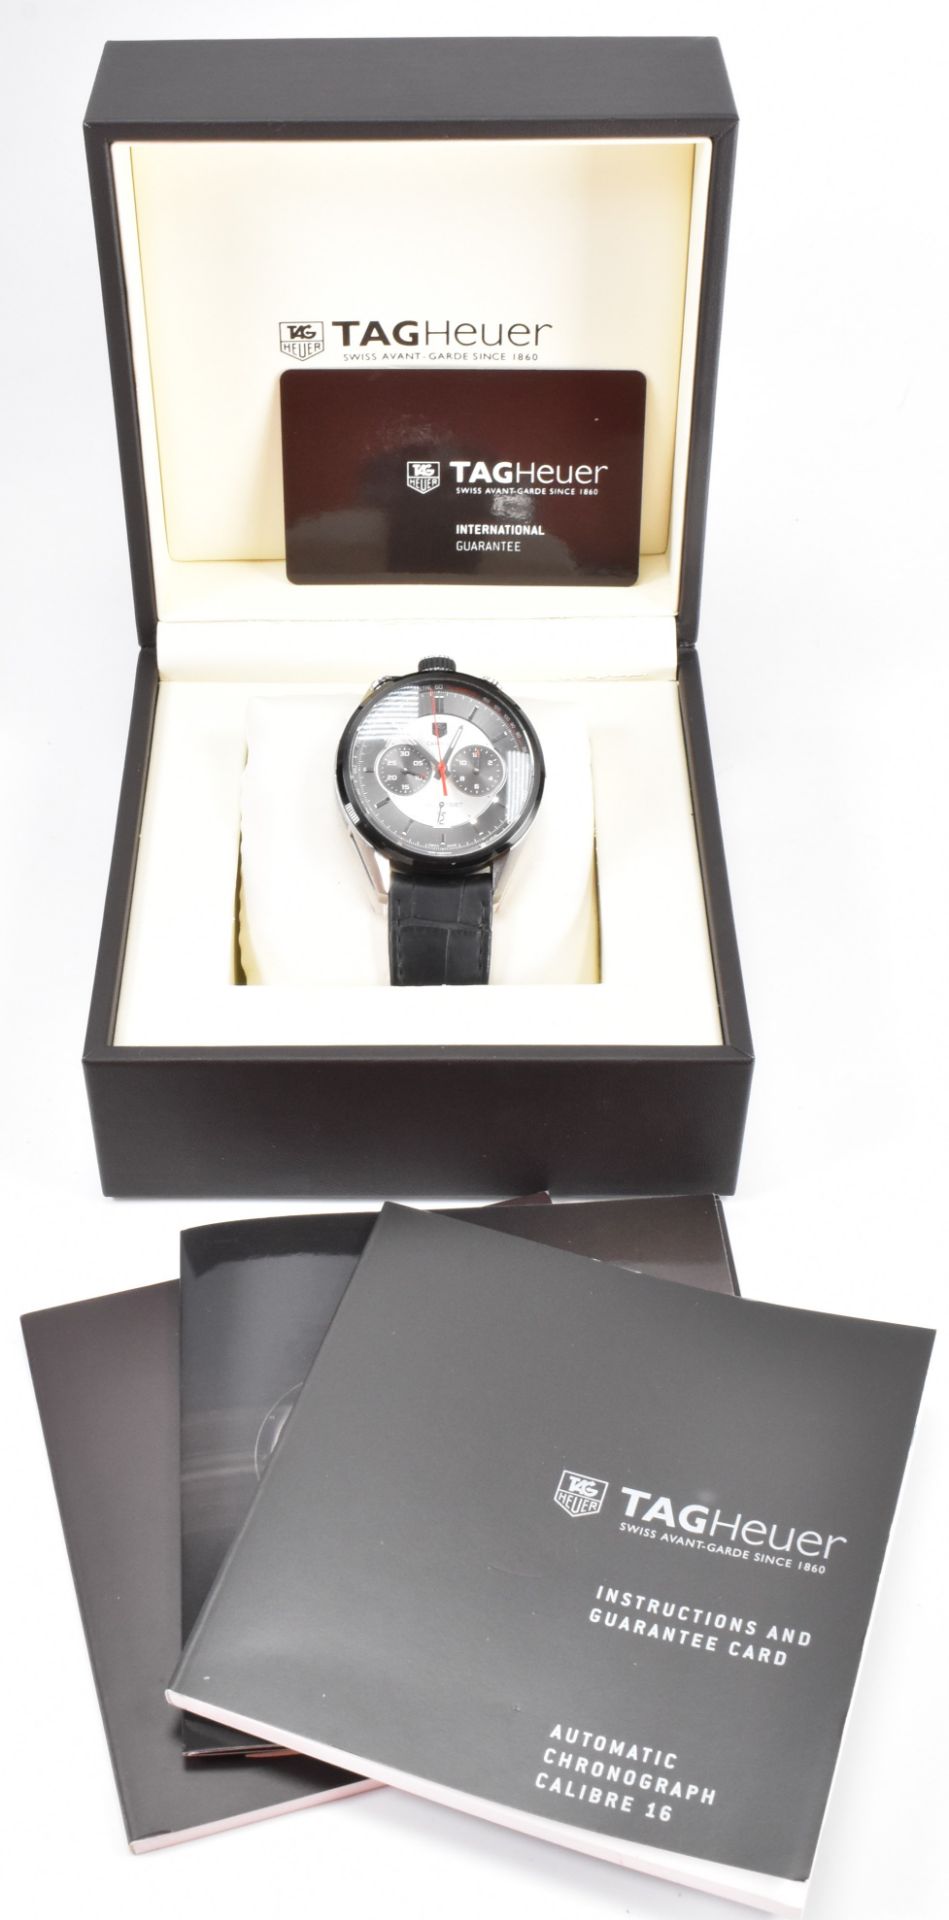 TAG HEUER CARRERA 50TH ANNIVERSARY LIMITED EDITION WATCH - Image 2 of 5